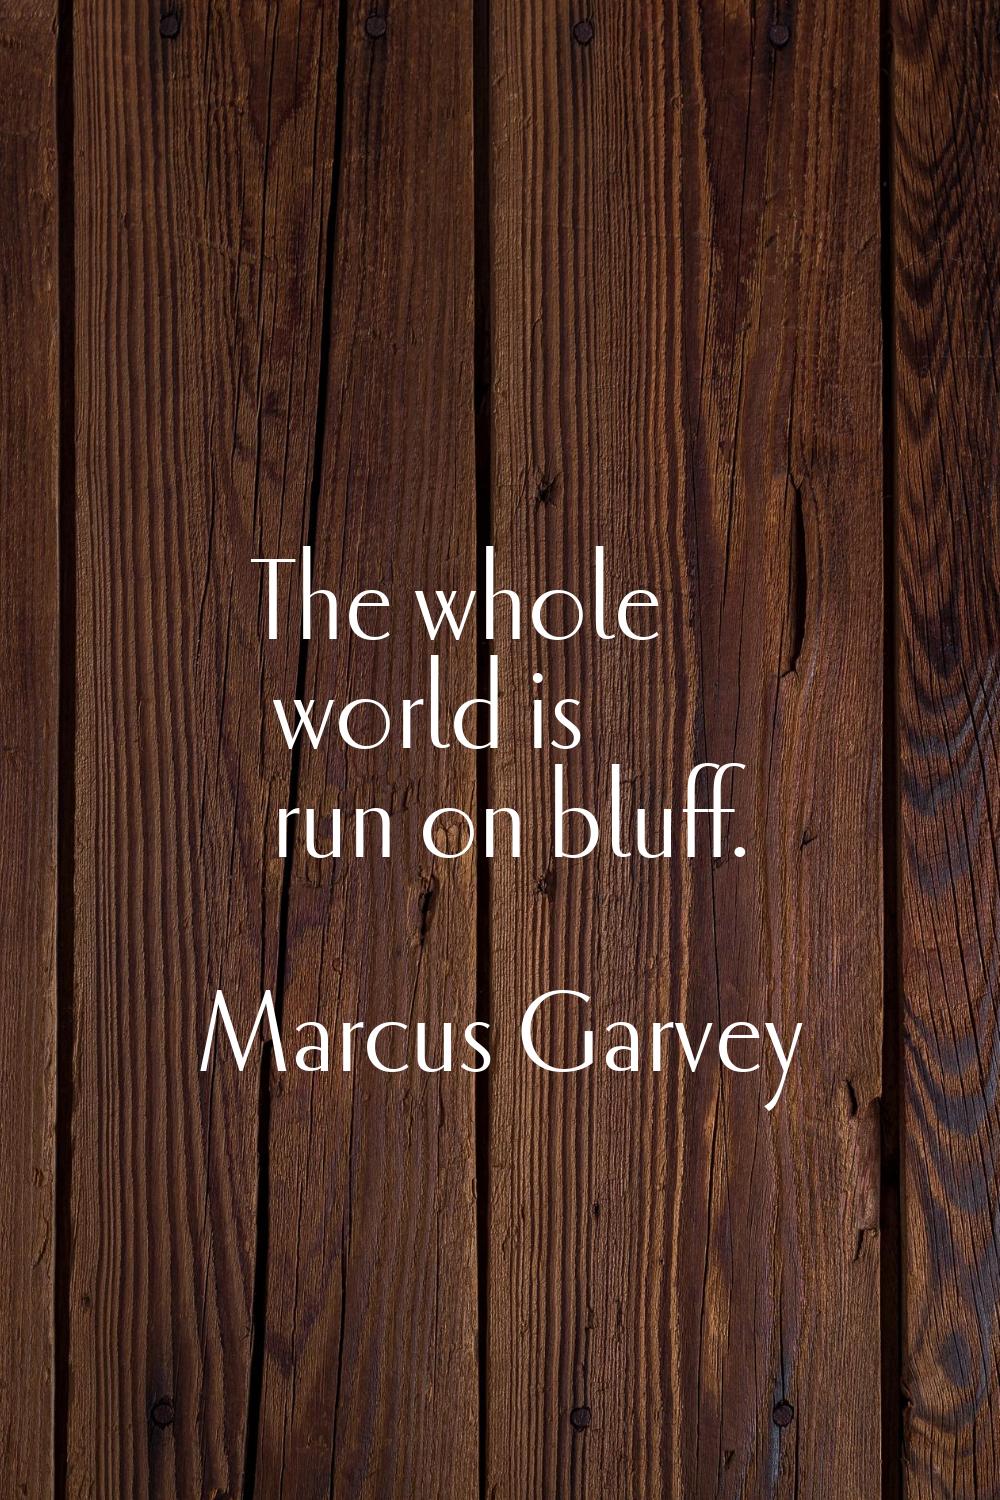 The whole world is run on bluff.